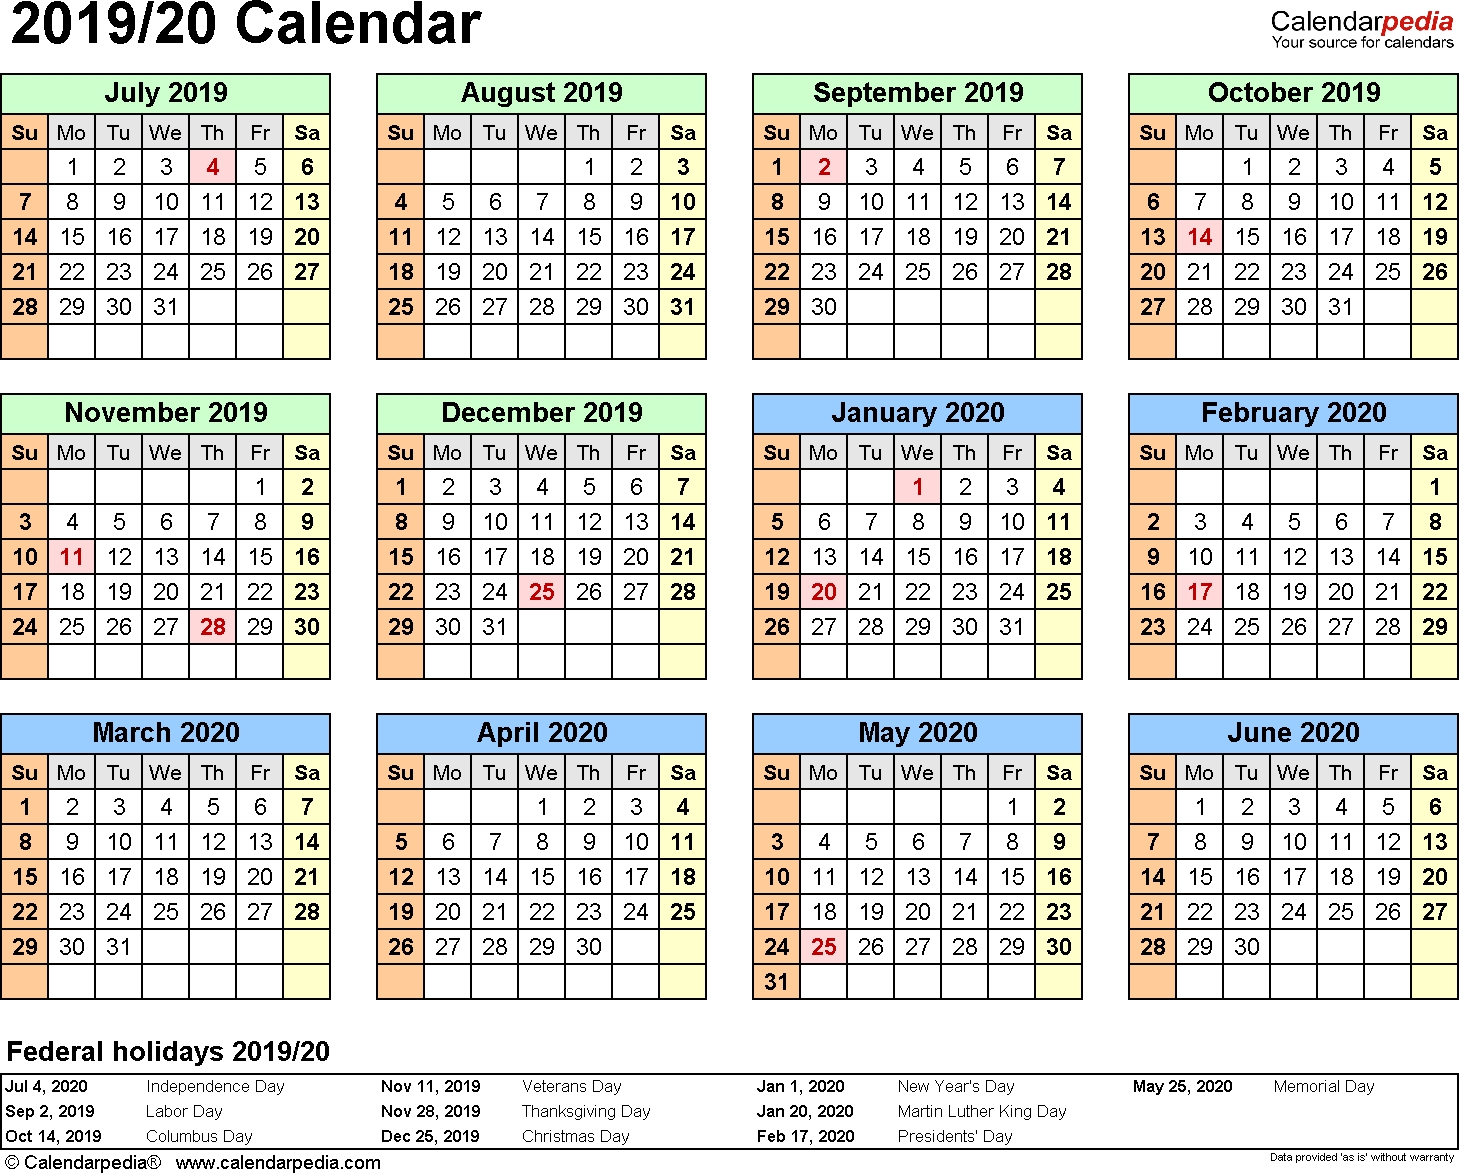 Split Year Calendars 2019/2020 (July To June) - Excel Templates Incredible Calendarpedia 2020 For South Africa